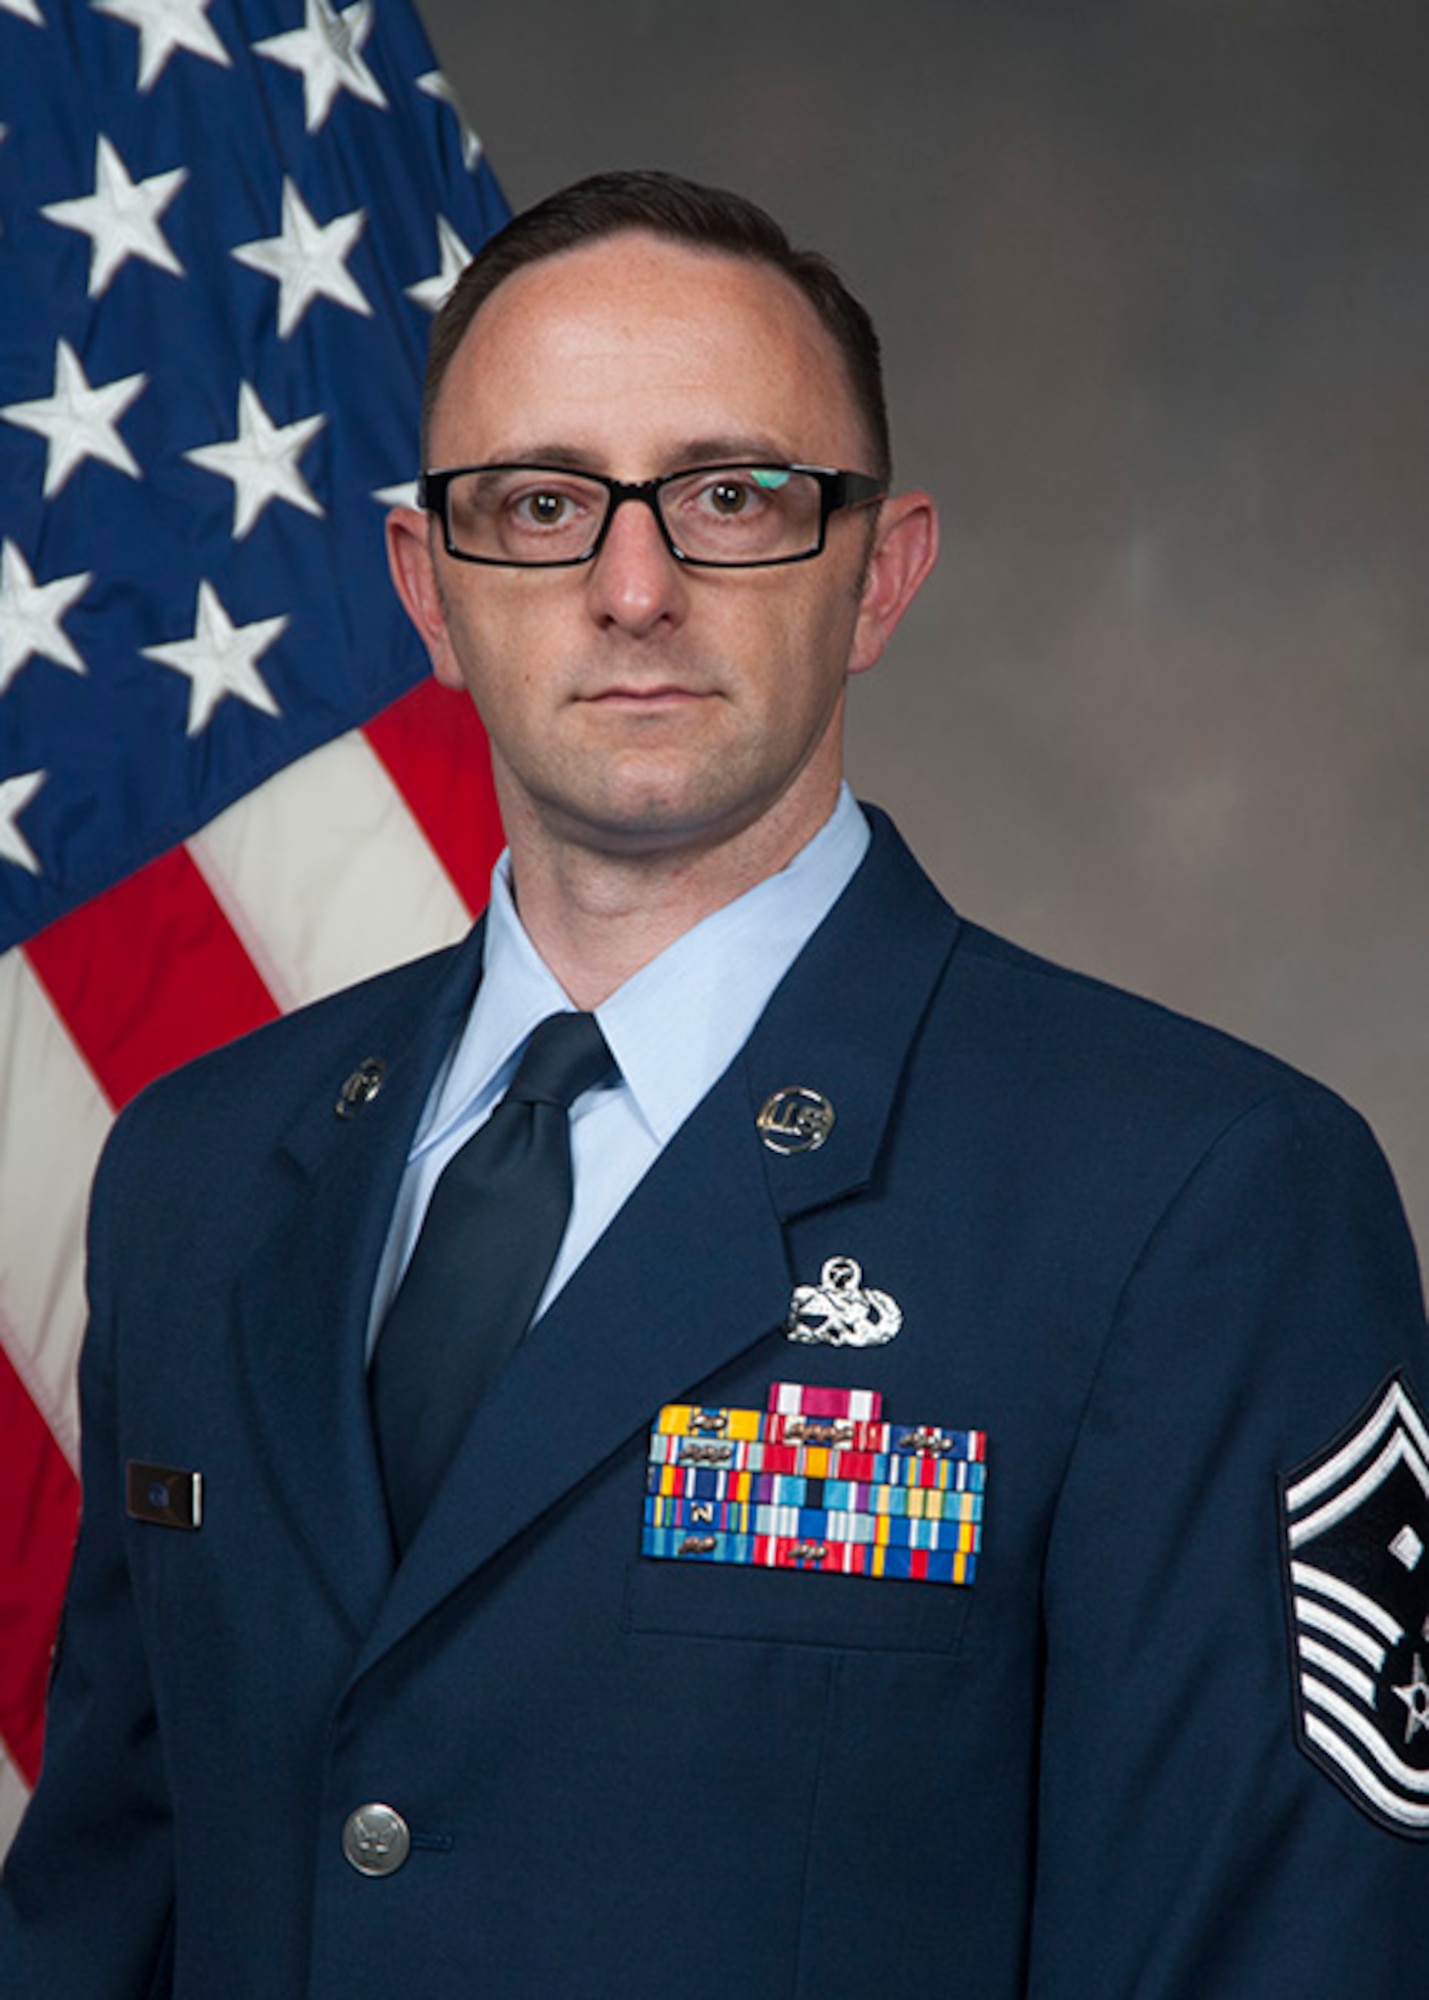 Senior Master Sgt. Jeremiah J. Kern, first sergeant, Headquarters Air Force Material Command